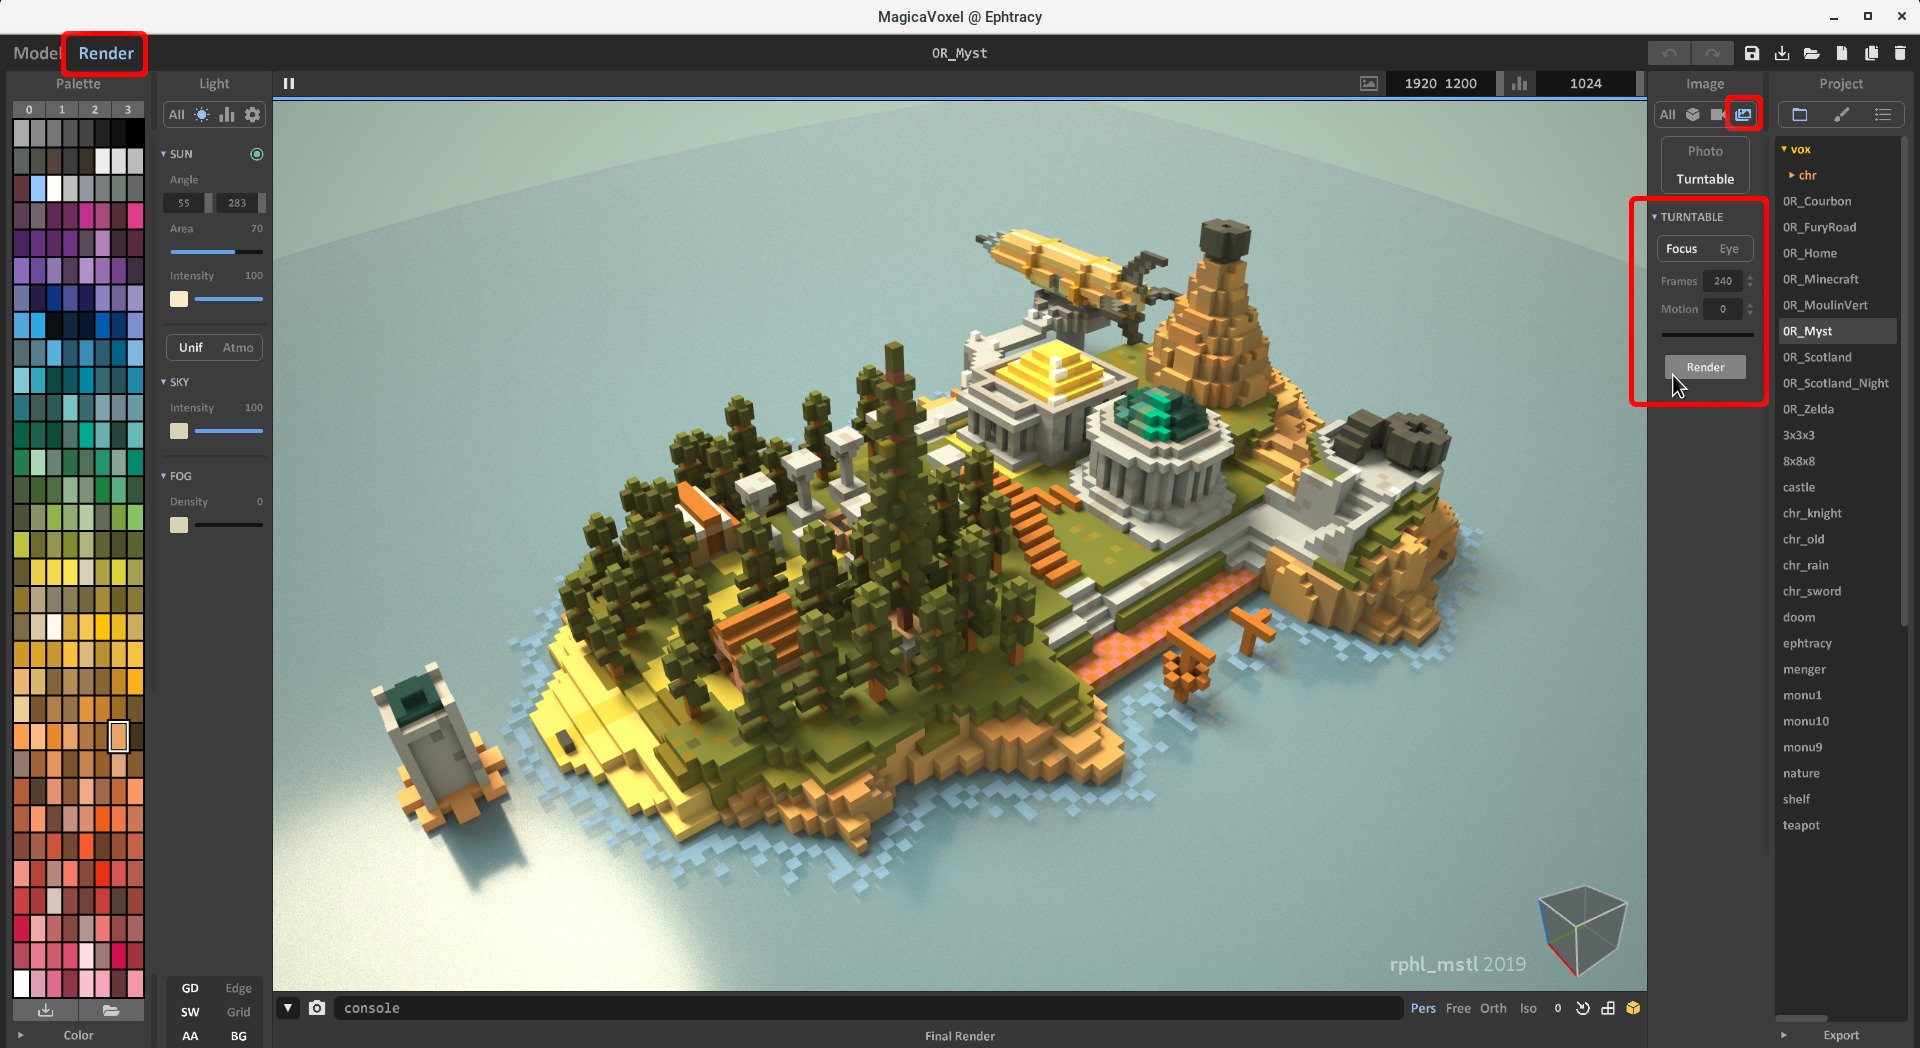 MagicaVoxel 3D Voxel Software